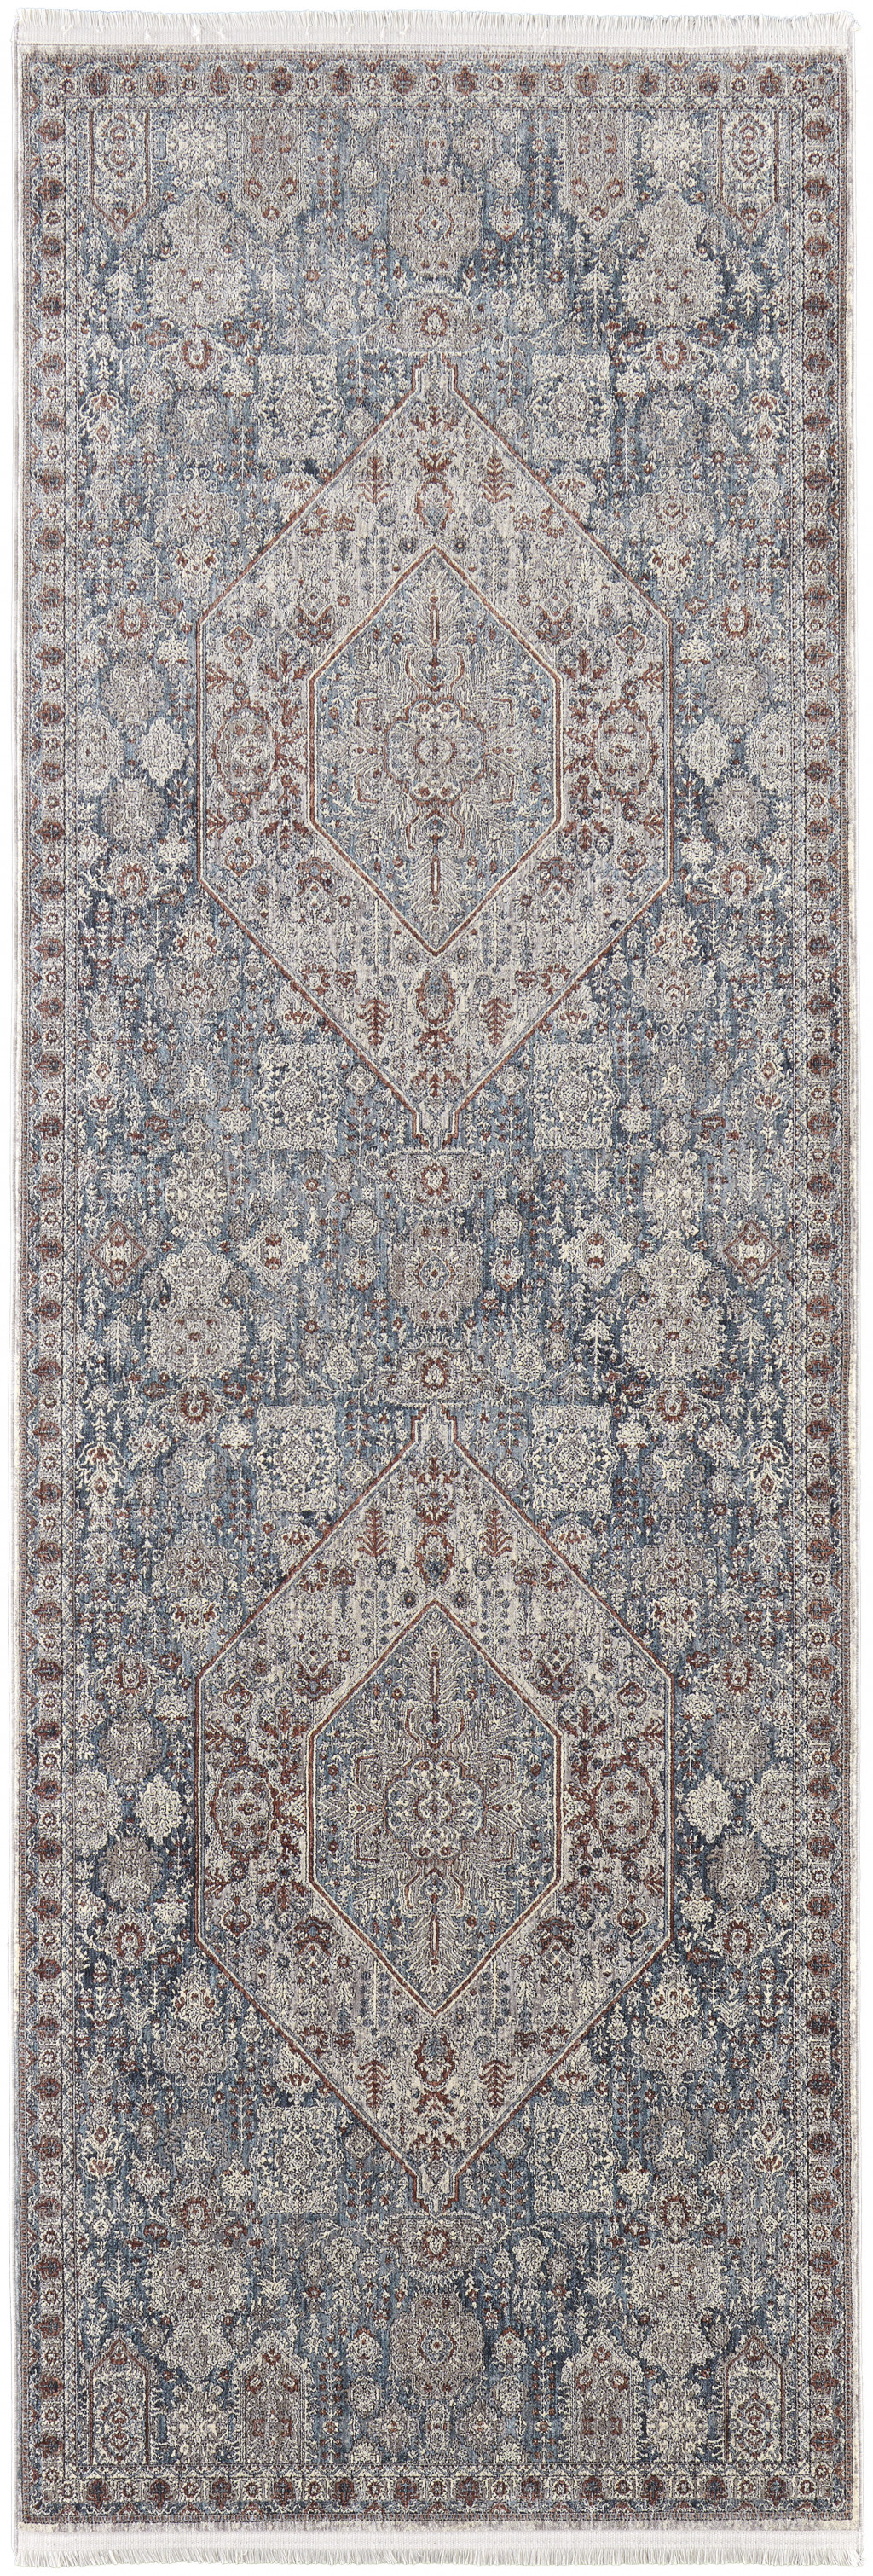 10' Blue And Ivory Floral Power Loom Stain Resistant Runner Rug-514479-1